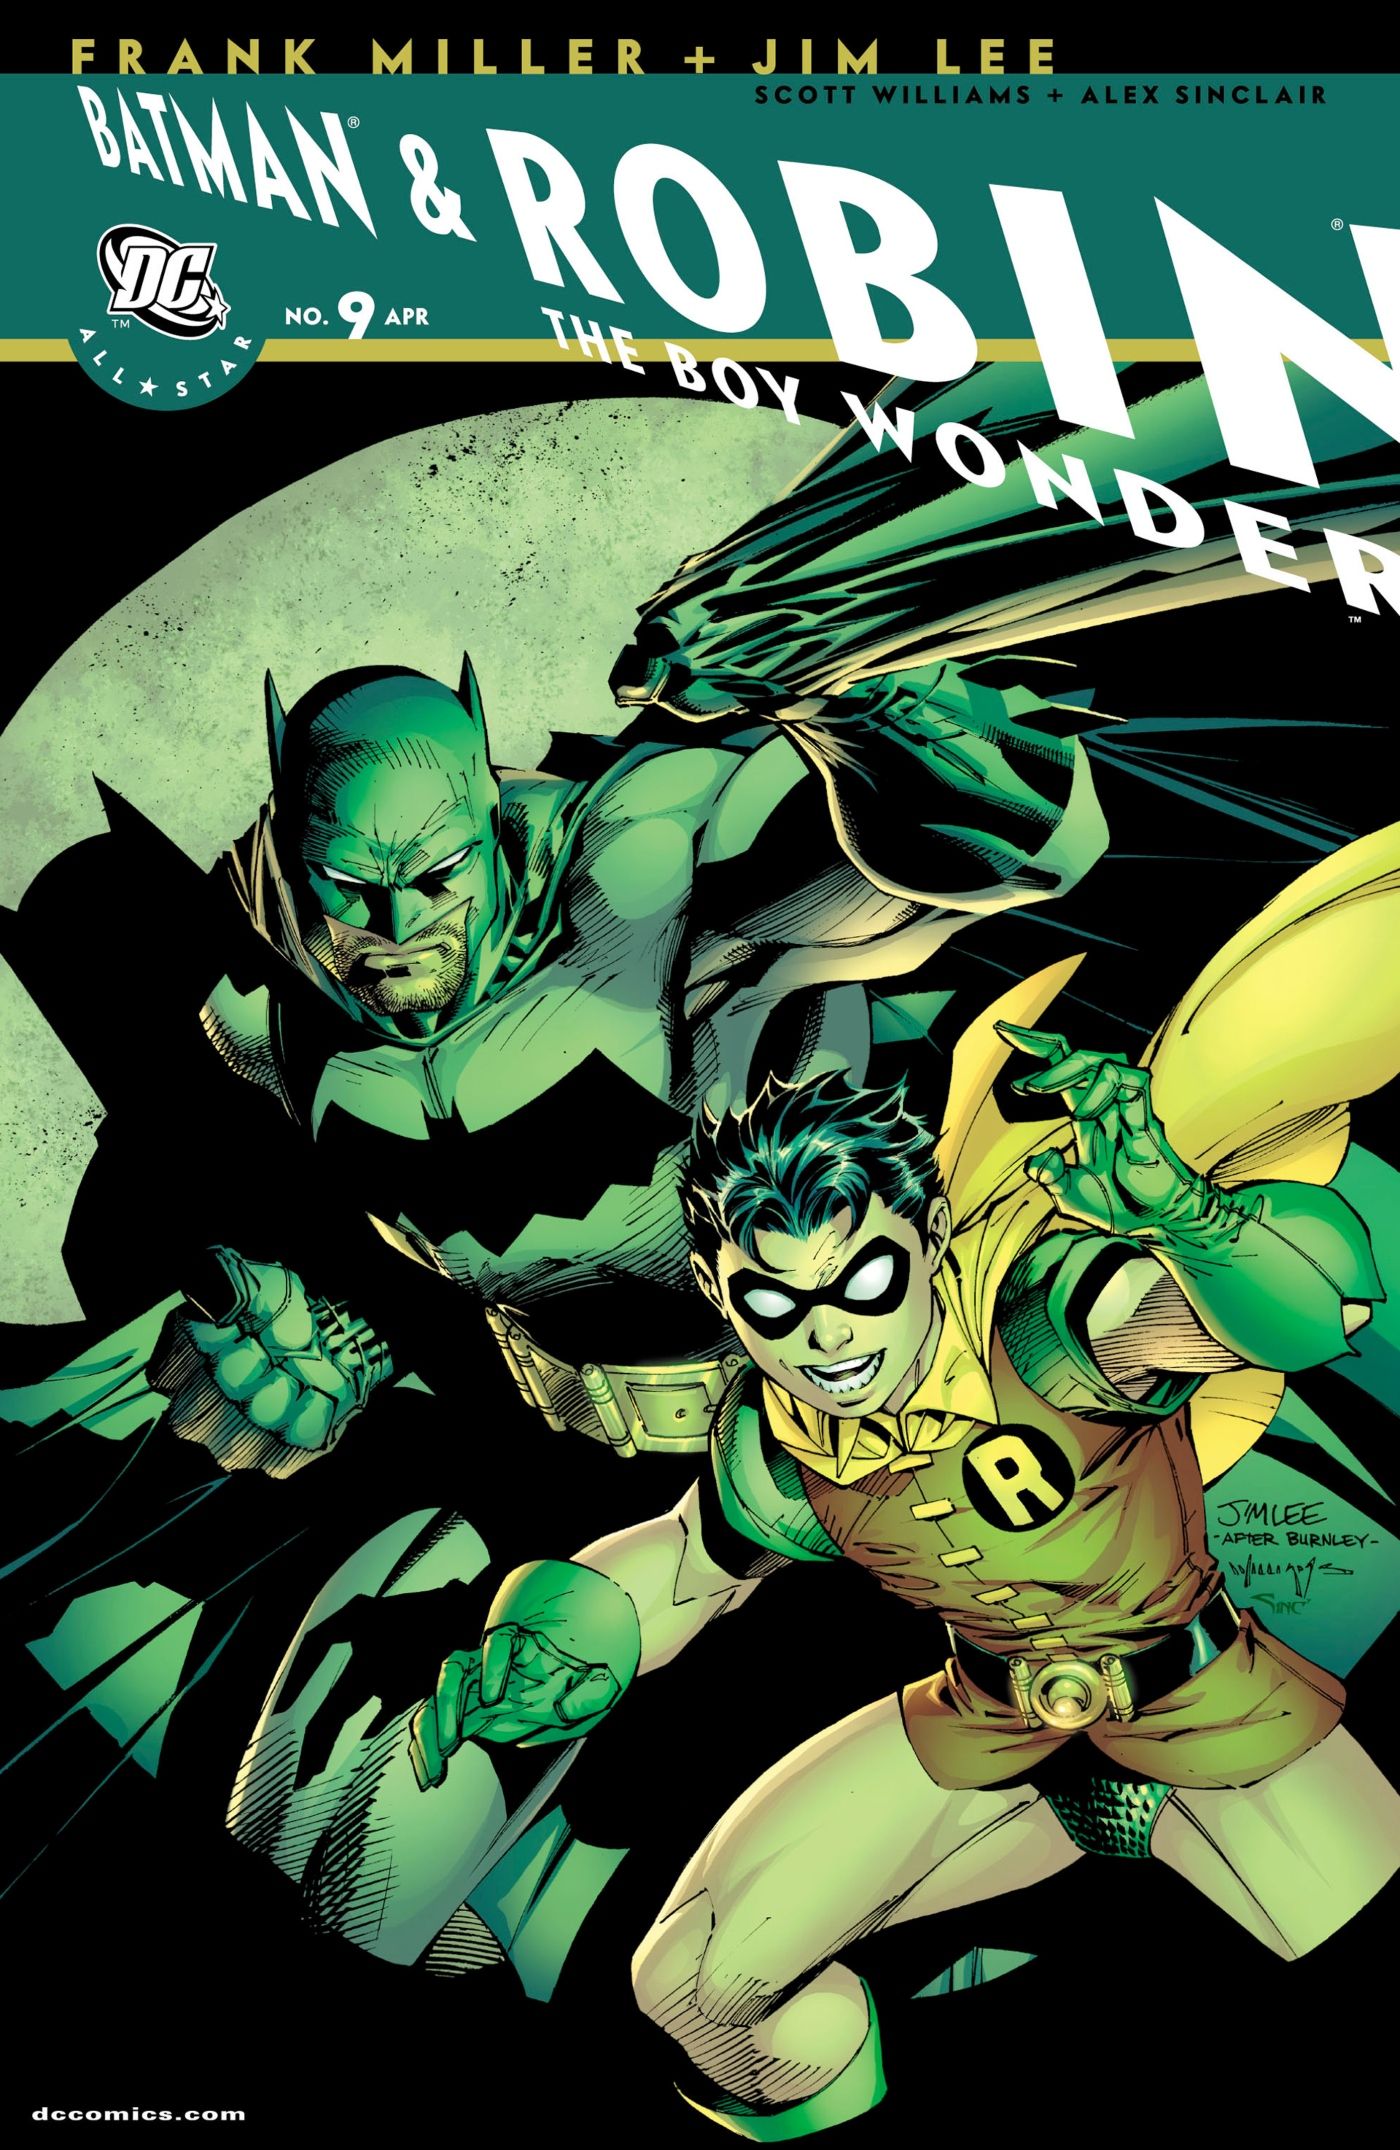 The cover of Batman and Robin, The Boy Wonder #9.